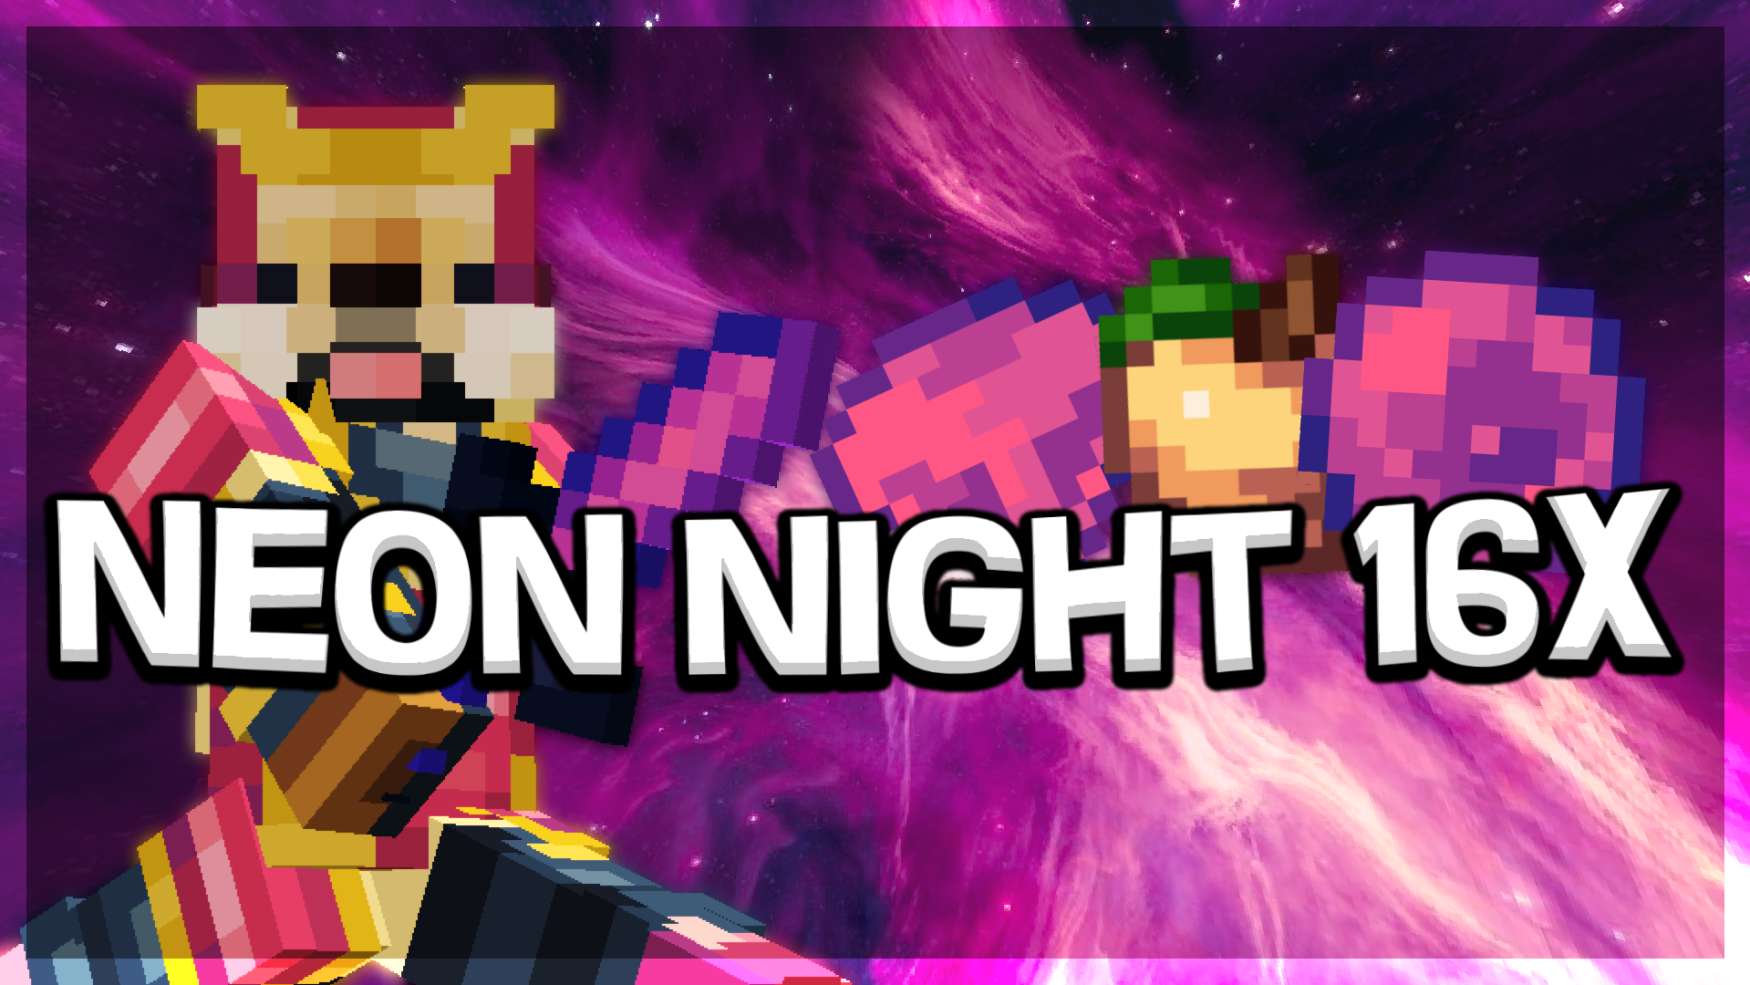 Neon Night 16x by volaxi on PvPRP